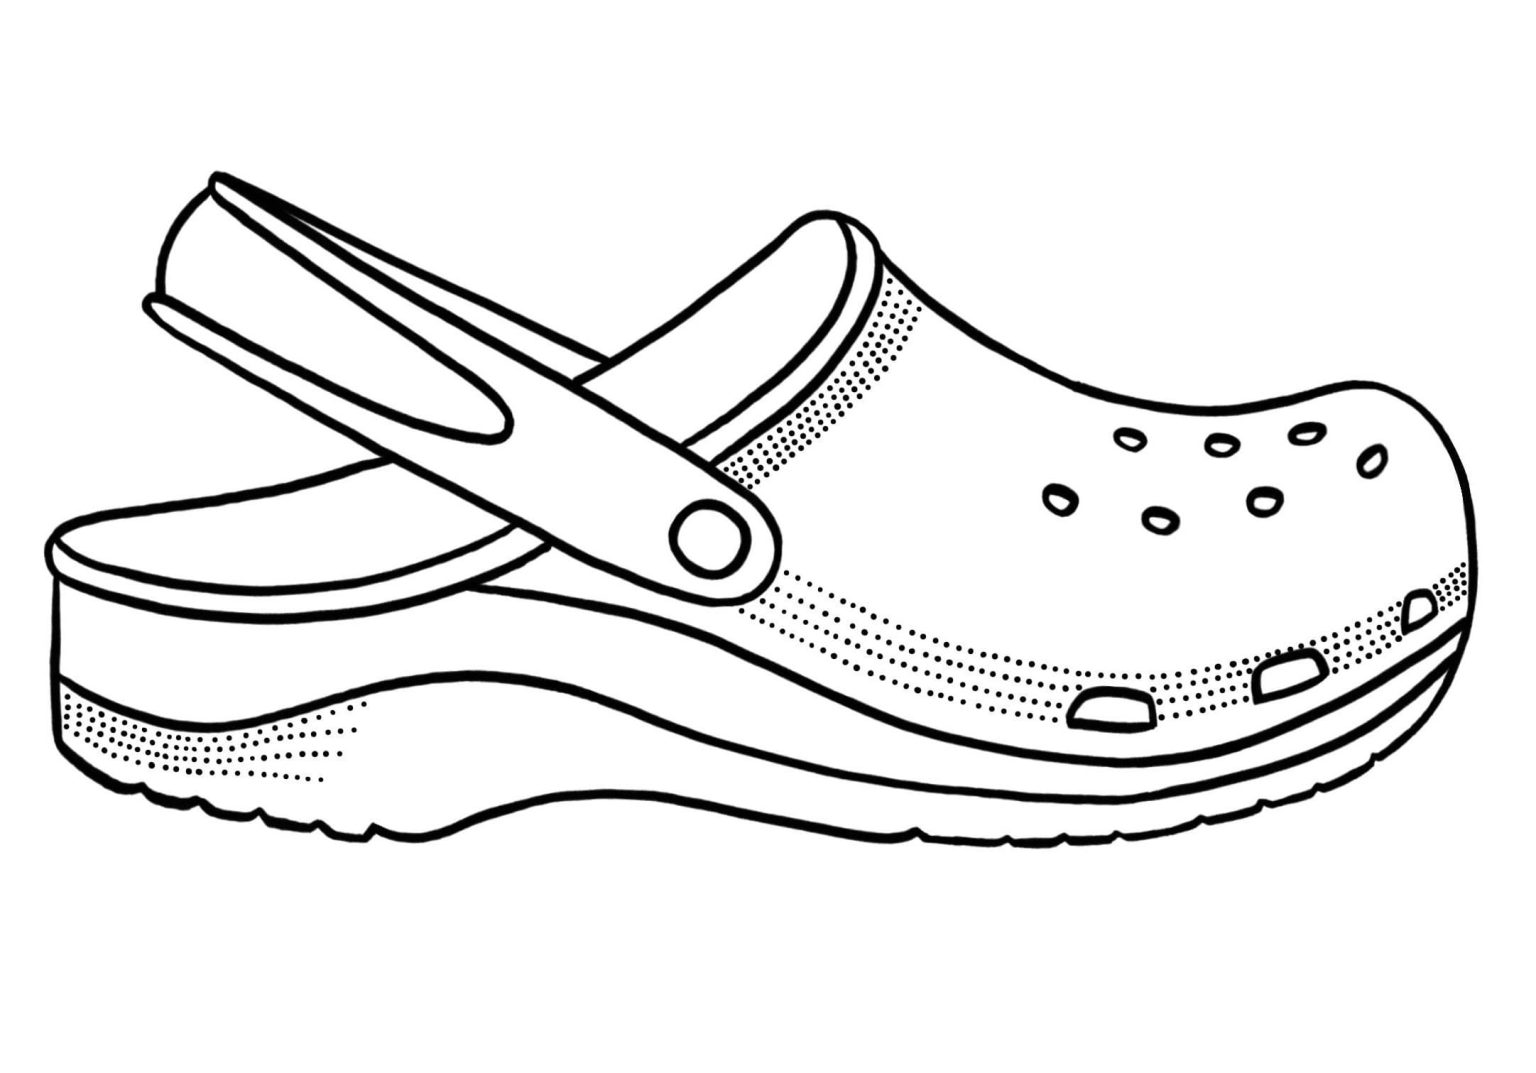 Explore Crocs Coloring Pages: A Creative Journey to Share